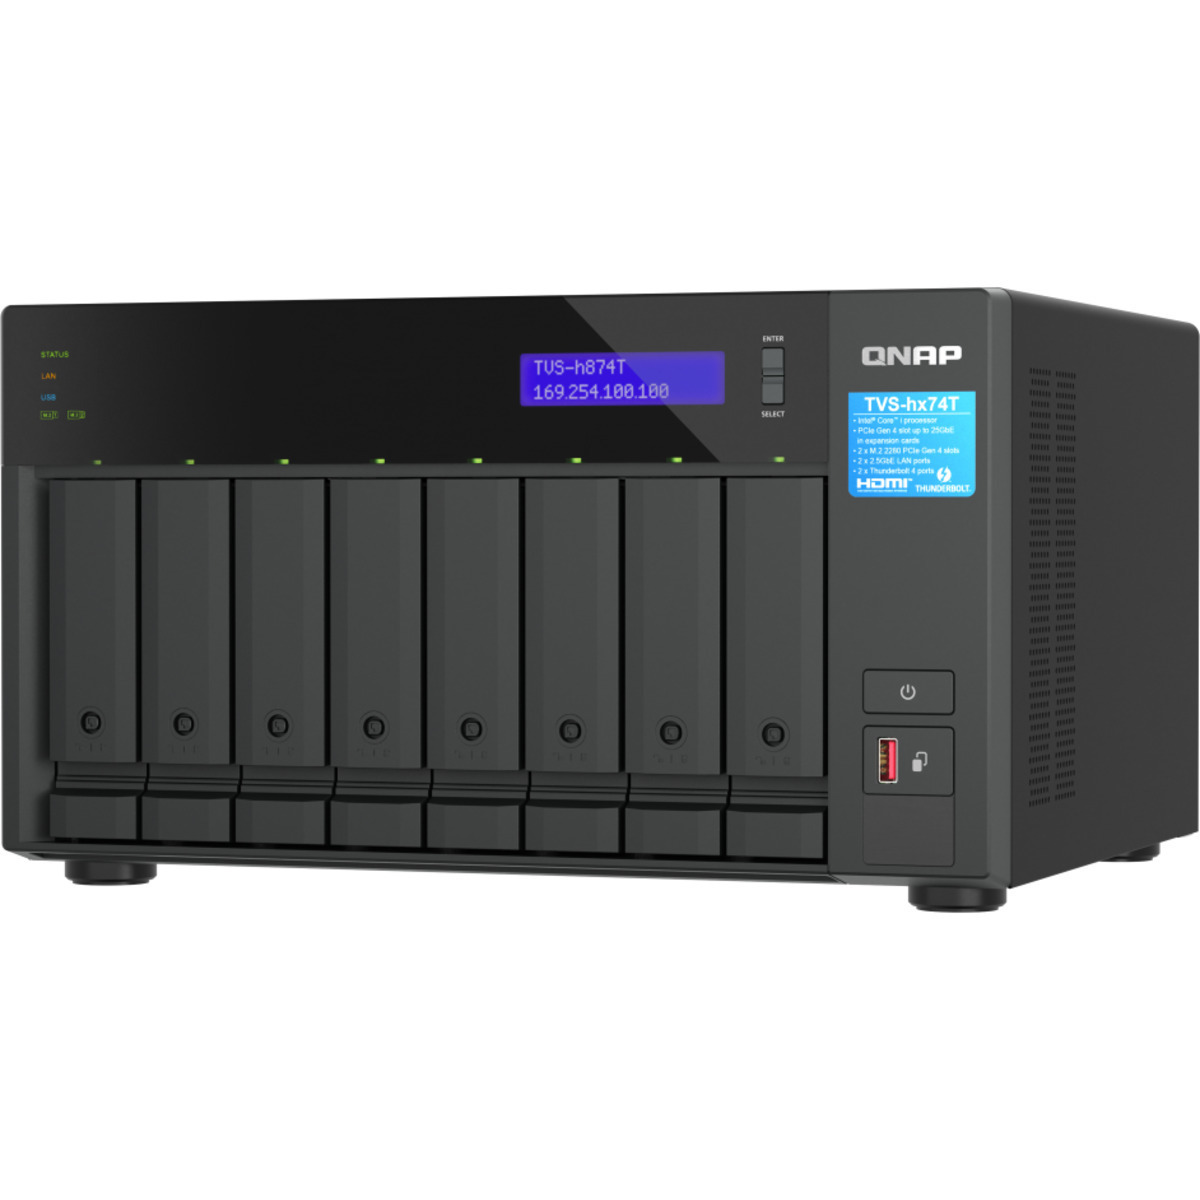 QNAP TVS-h874T Core i7 Thunderbolt 4 64tb 8-Bay Desktop Multimedia / Power User / Business DAS-NAS - Combo Direct + Network Storage Device 4x16tb Western Digital Red Pro WD161KFGX 3.5 7200rpm SATA 6Gb/s HDD NAS Class Drives Installed - Burn-In Tested TVS-h874T Core i7 Thunderbolt 4